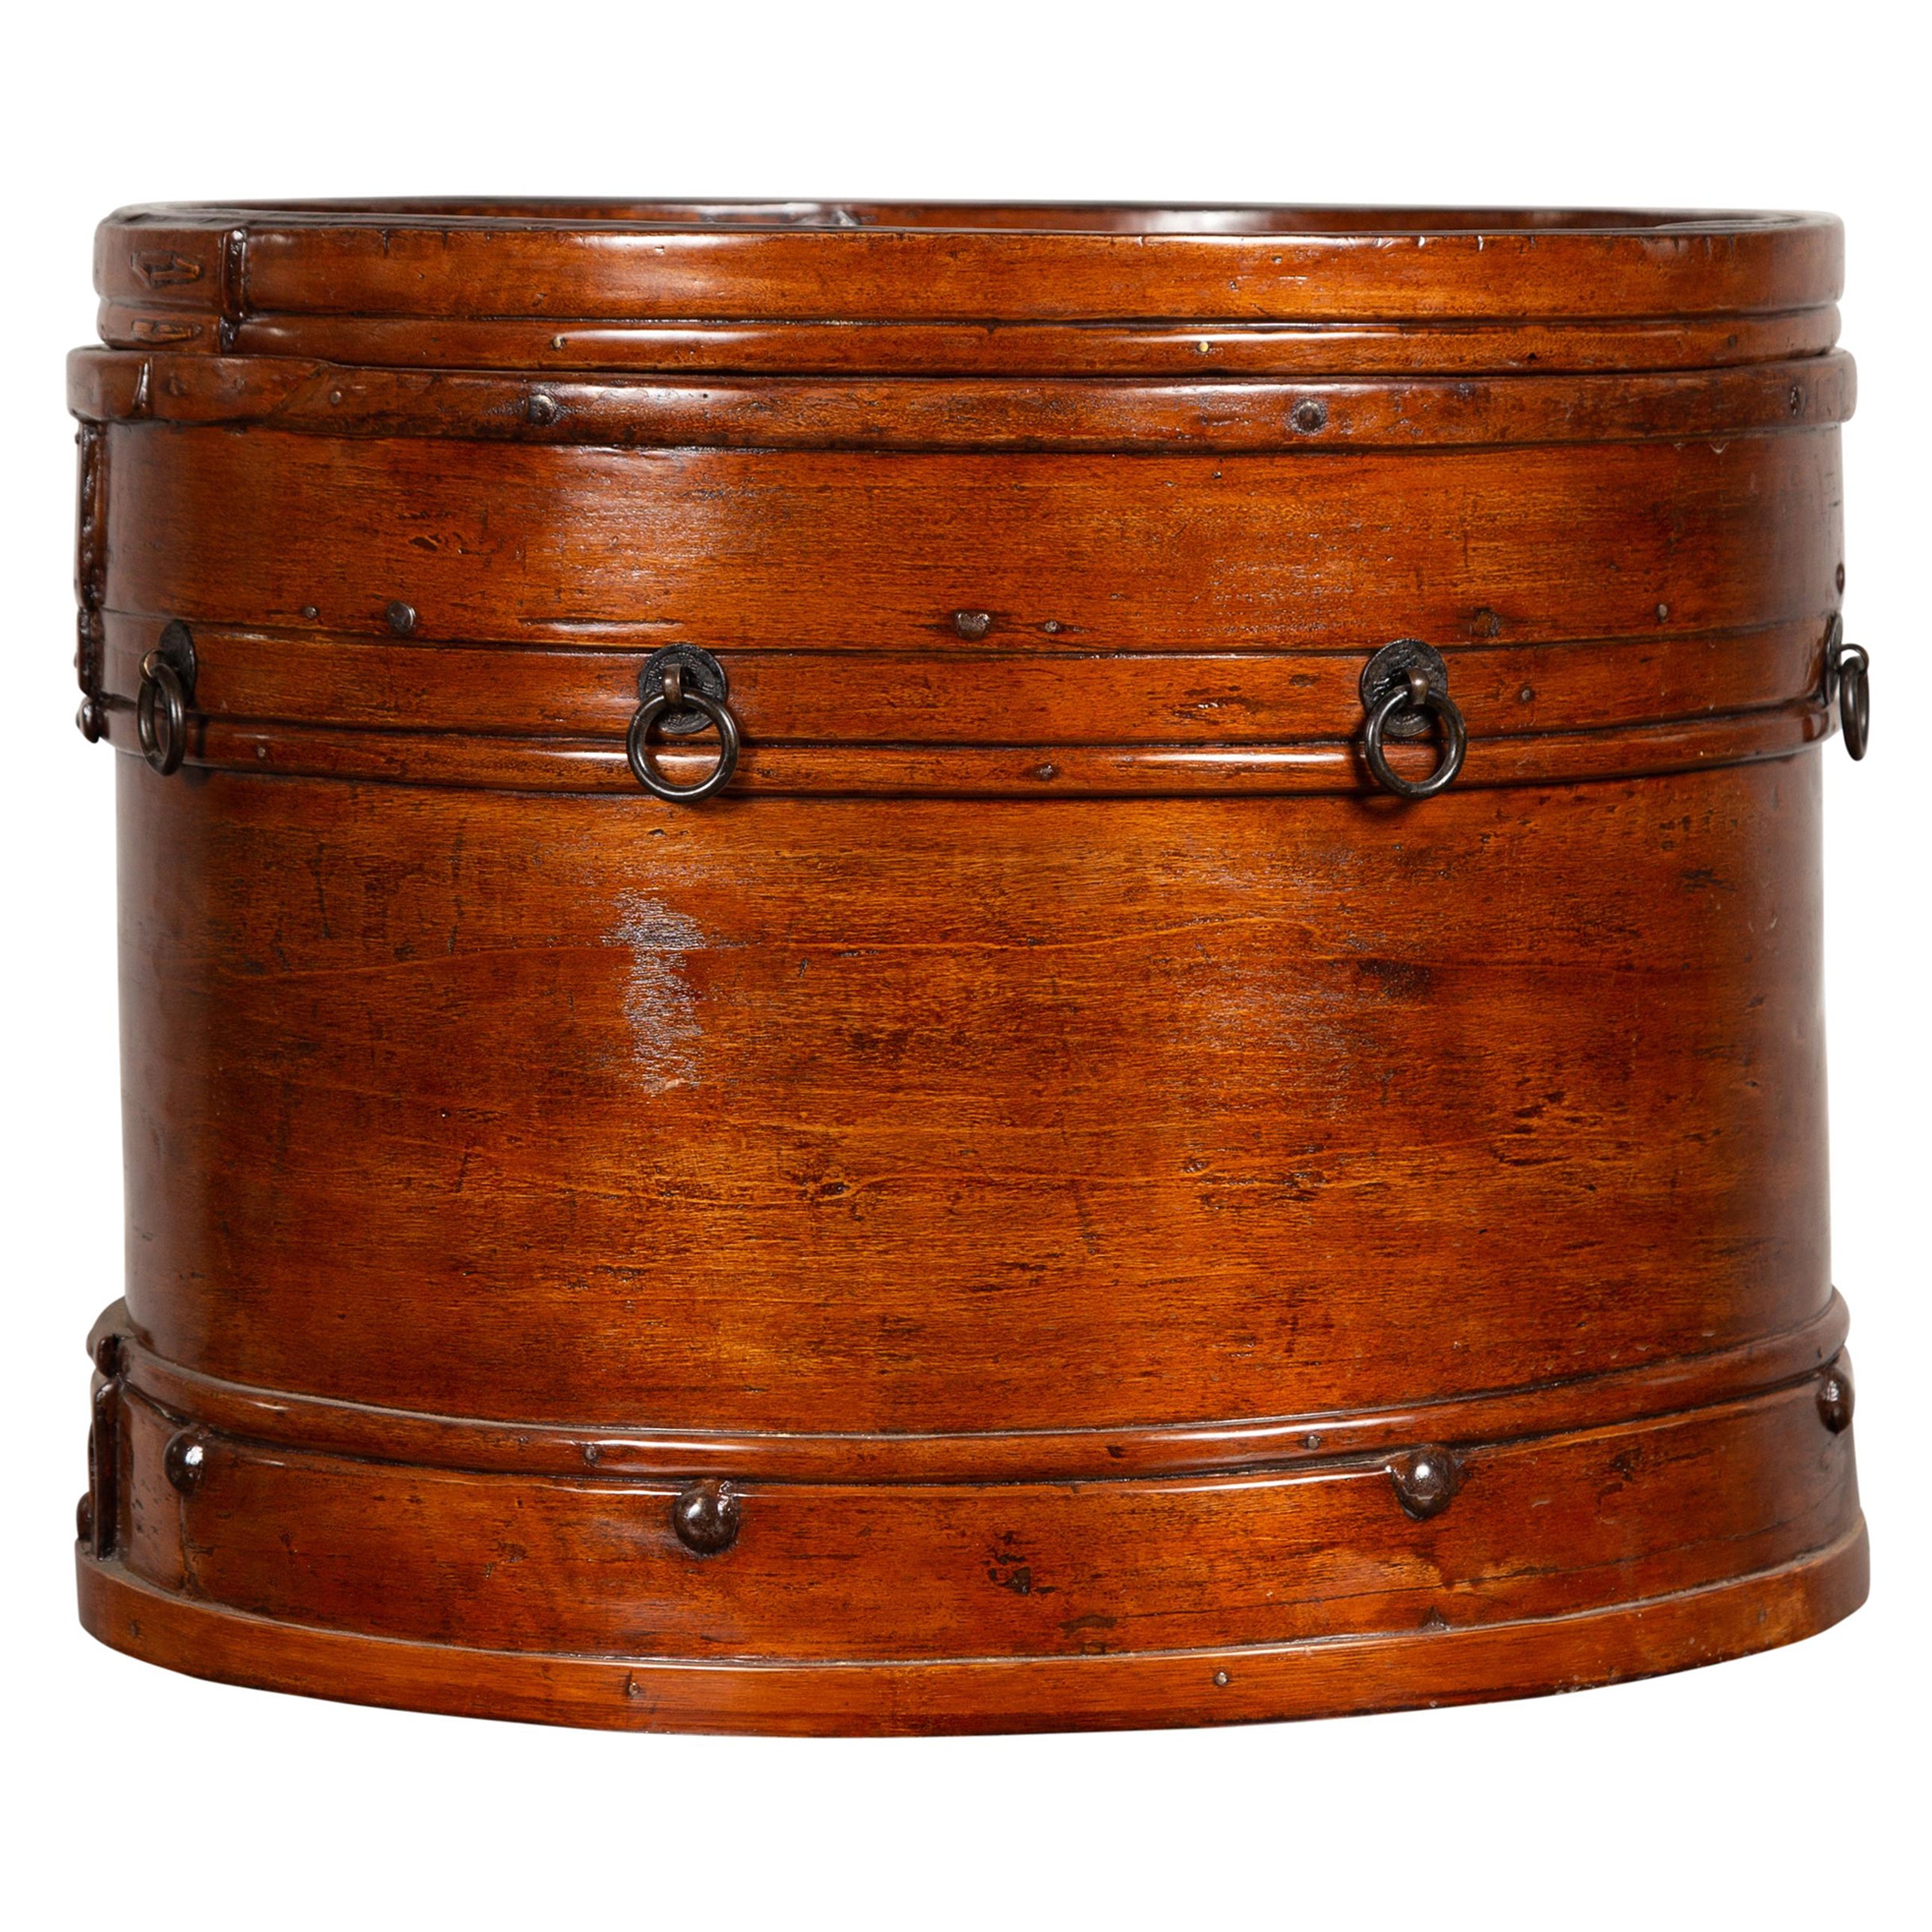 Qing Dynasty 19th Century Round Lidded Wooden Box with Rattan Top For Sale